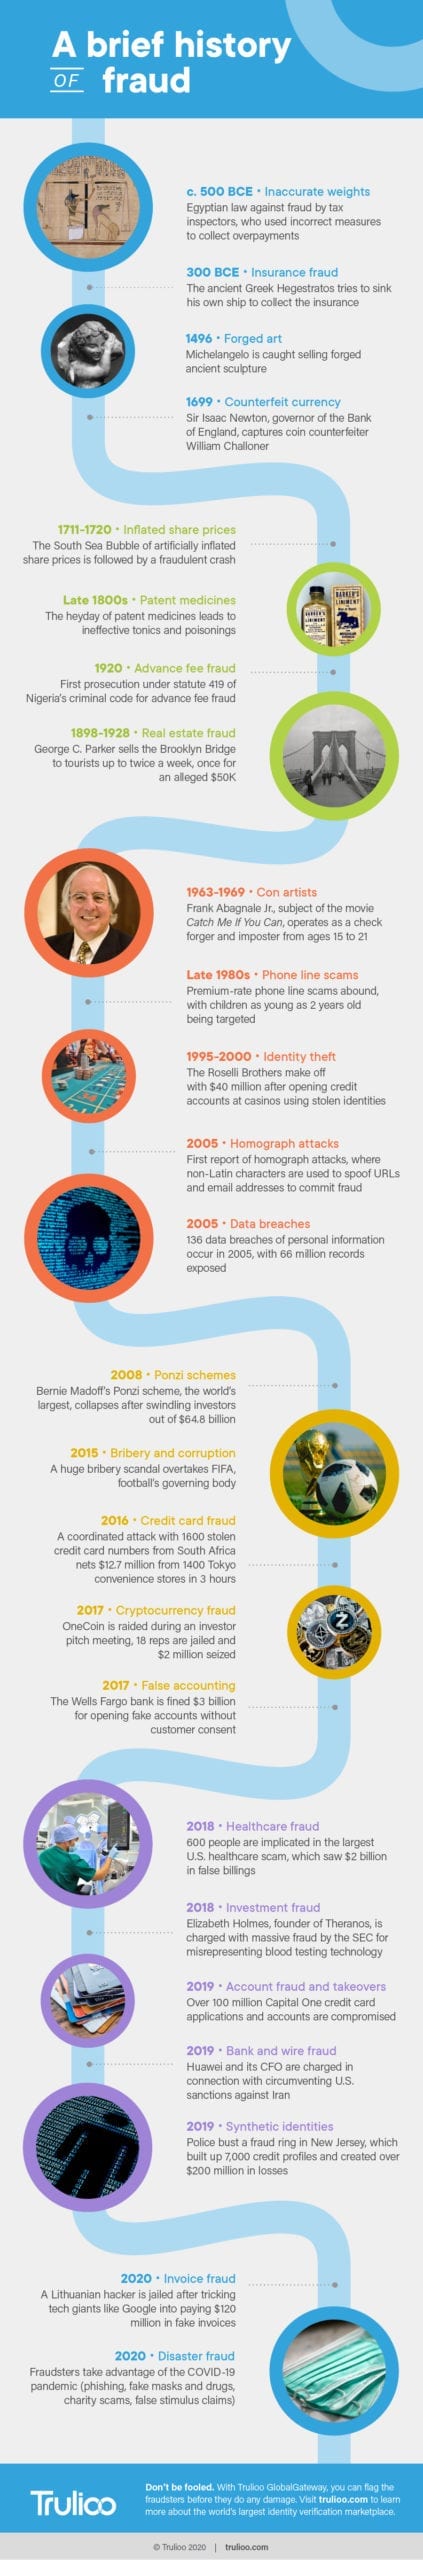 Infographic - History of Fraud